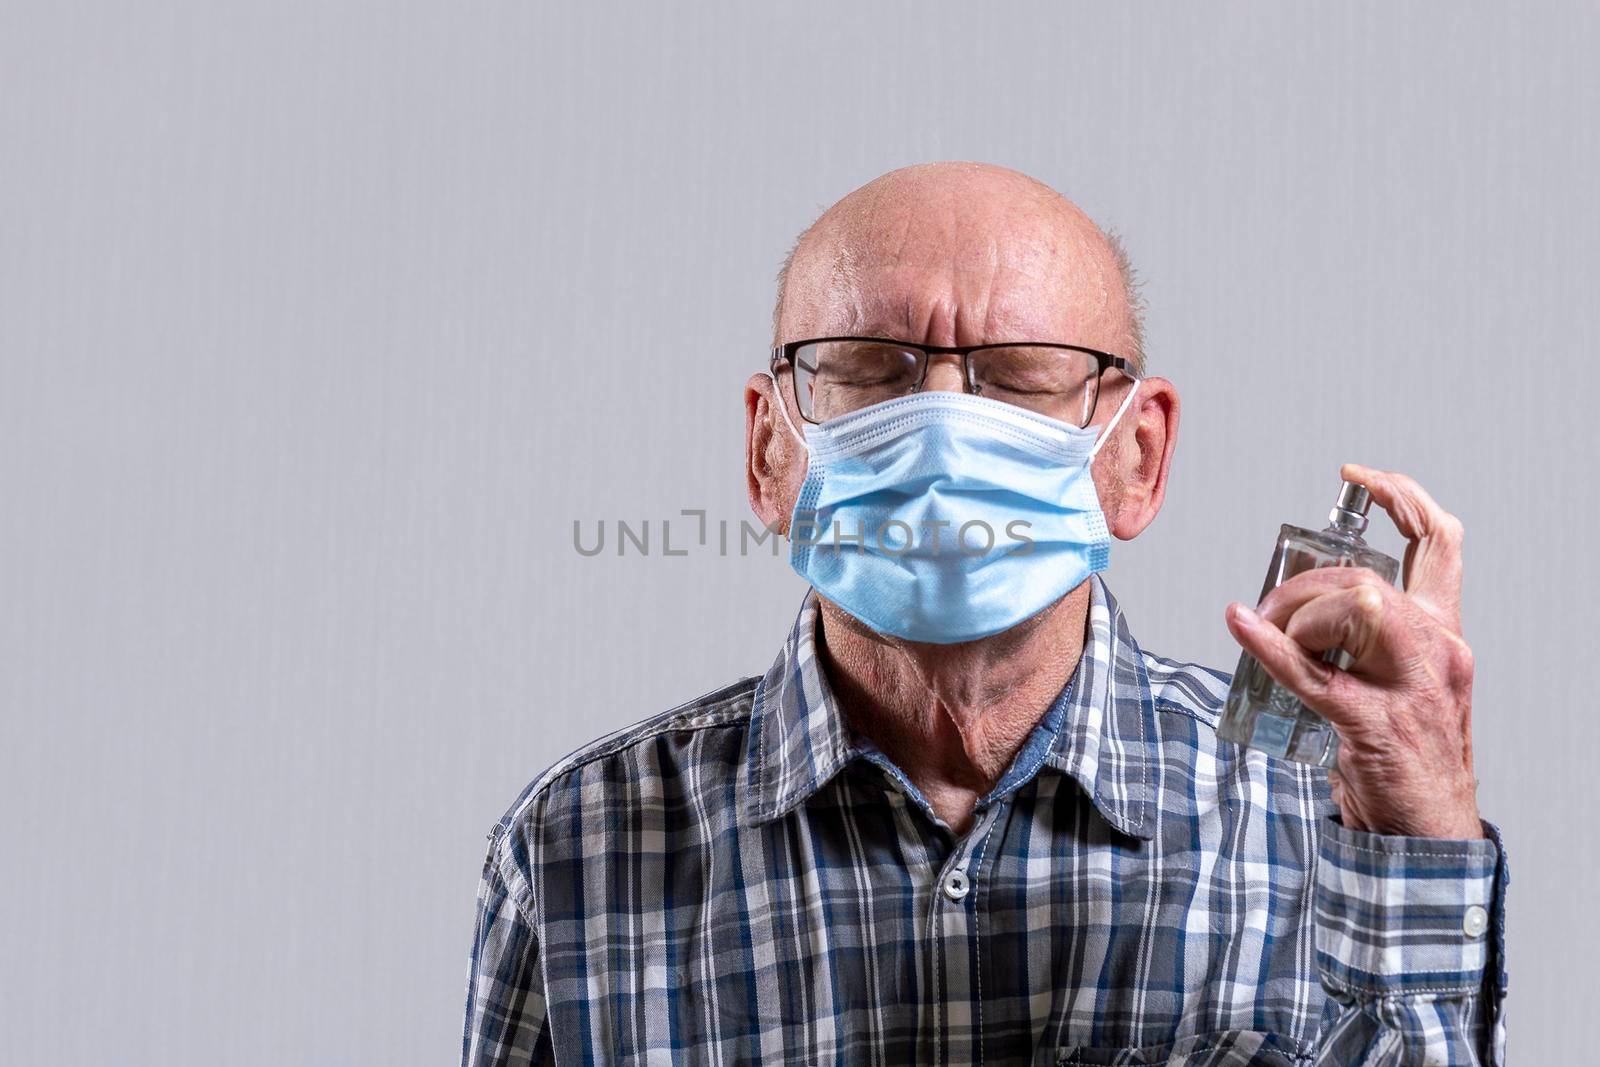 Old bald man with glasses and medical mask with perfume bottle spray in his hand. Copy space. by Essffes